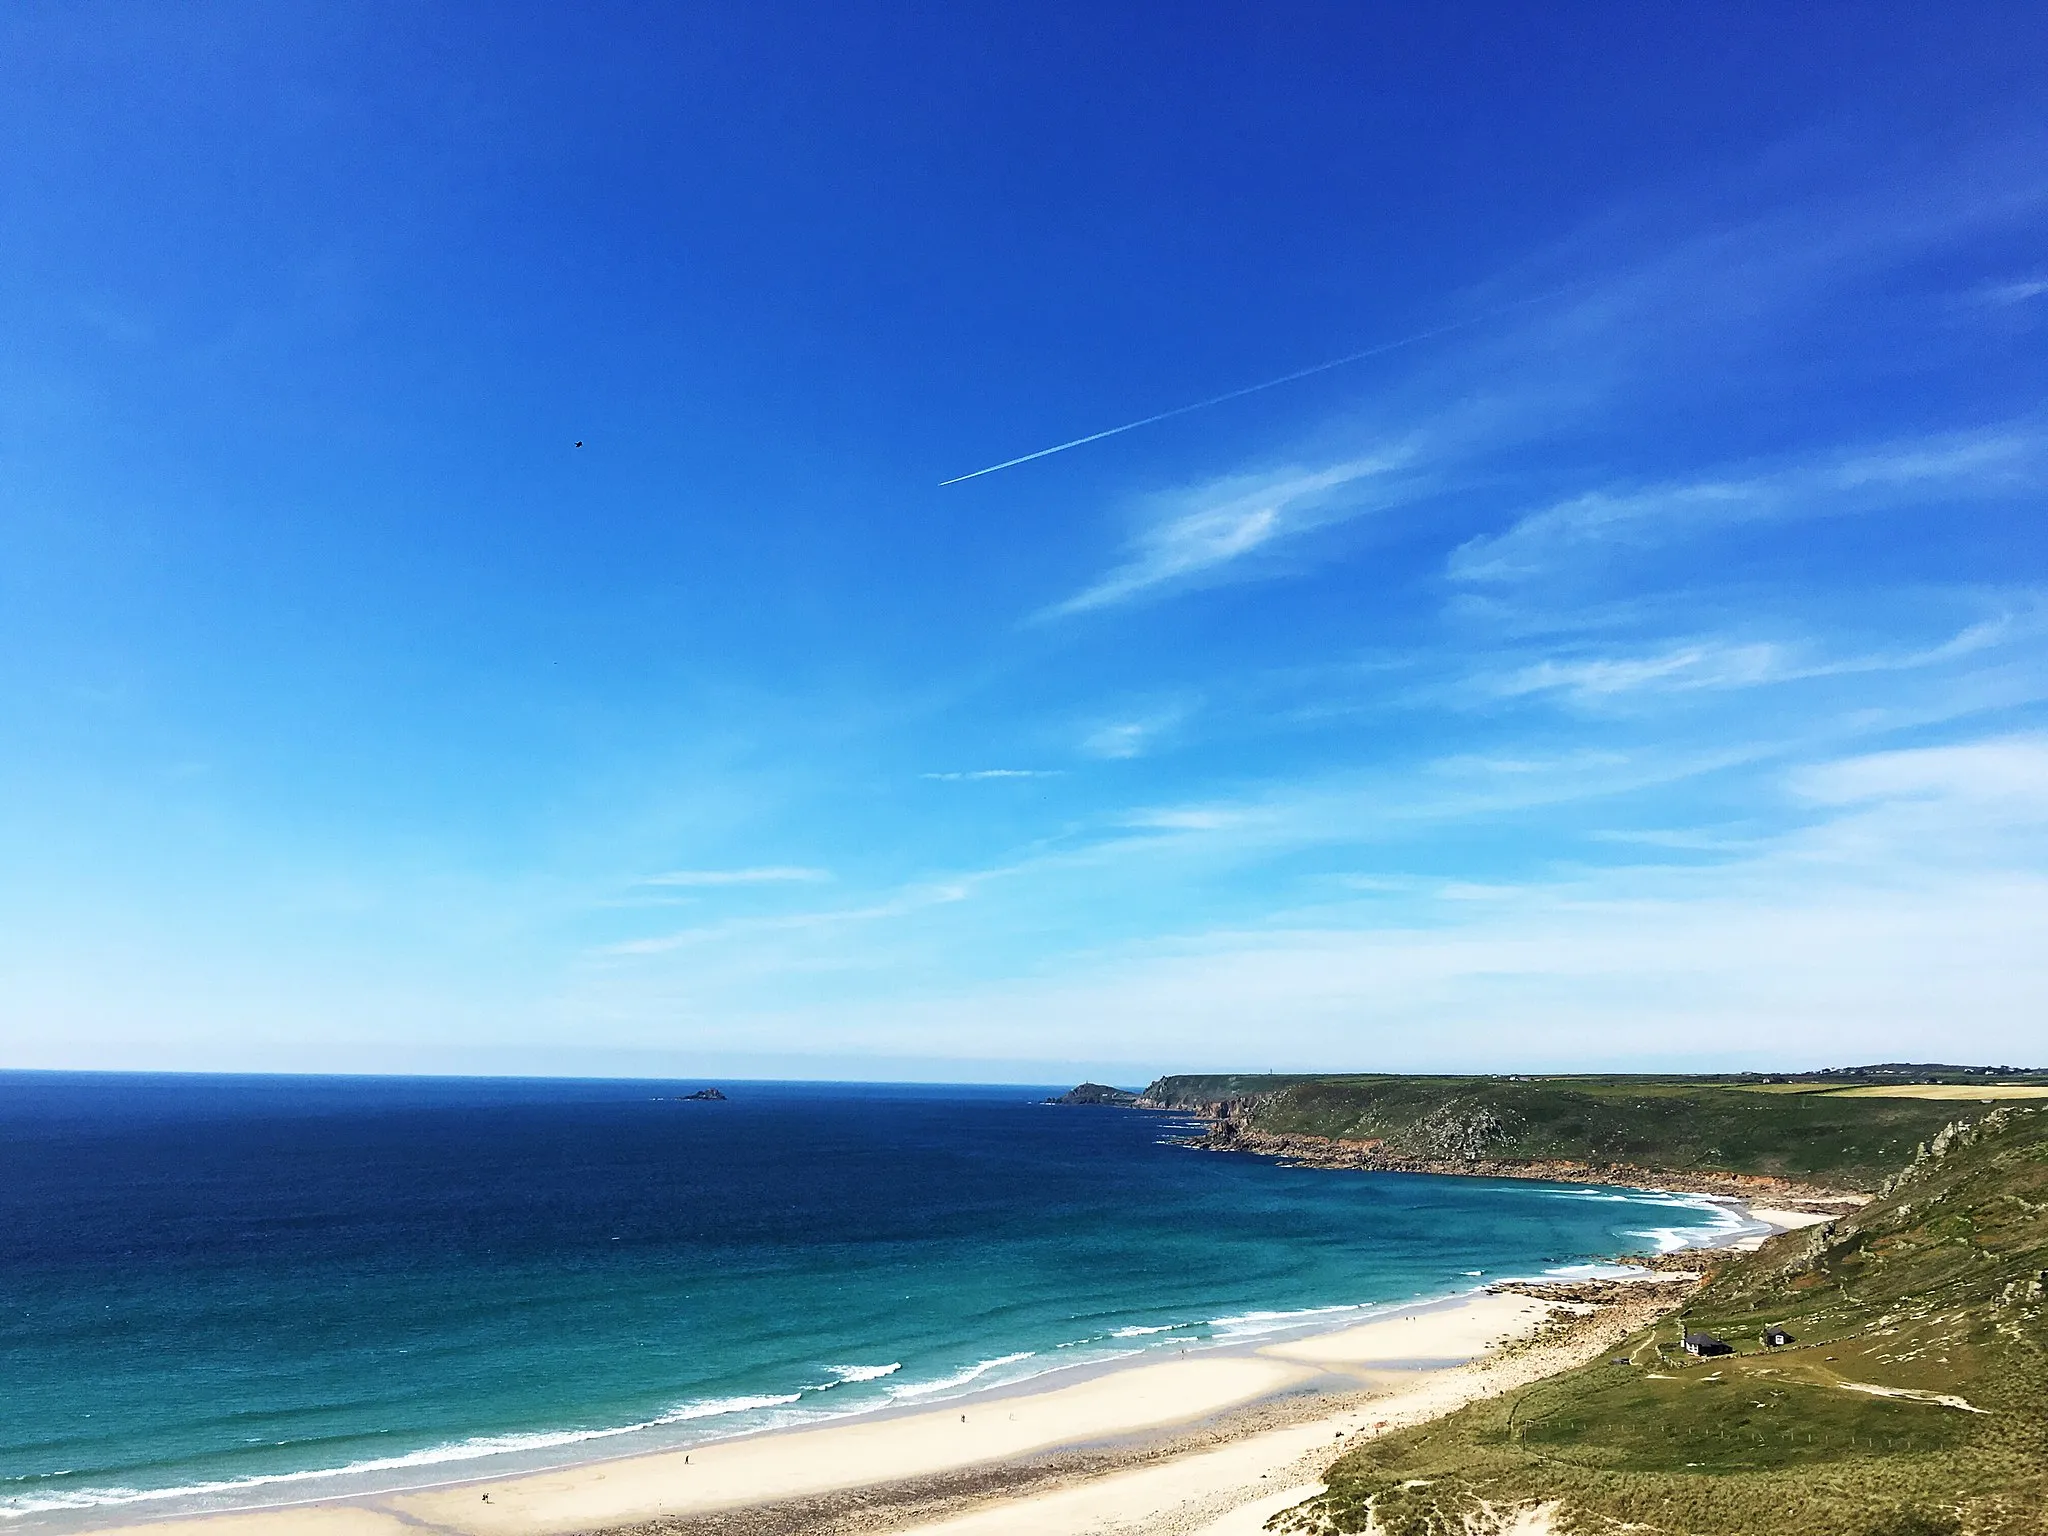 Photo showing: This is the beach at Sennen, also known as Whitesands Beach. The Atlantic swell provides the surf for which its noted. The view is looking down from Cove Road, showing the coastline with Cape Cornwall in the distance.